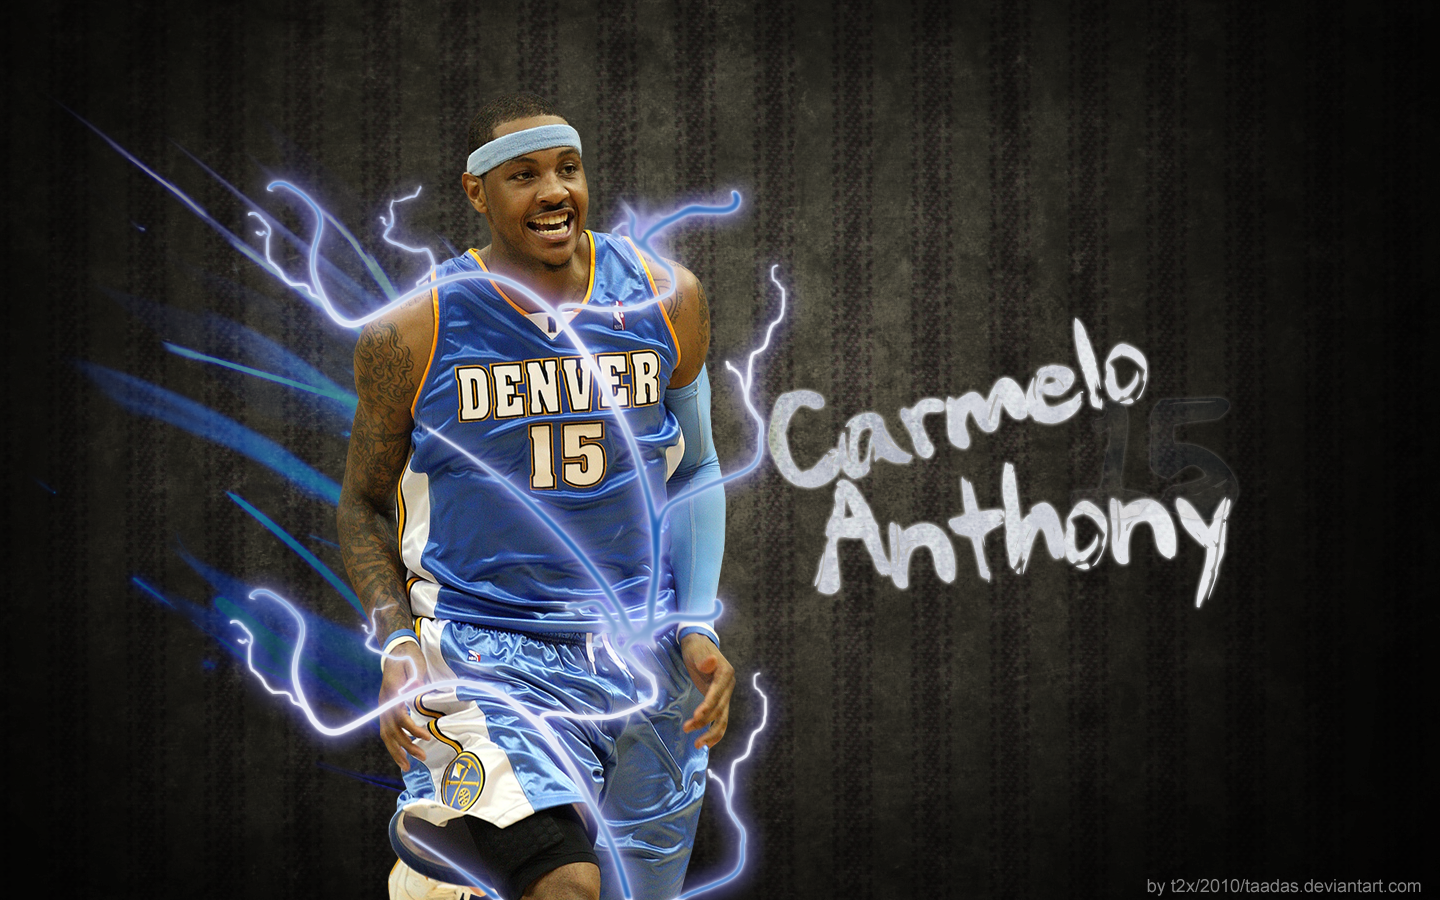 All Sports Club Carmelo Anthony hd New Wallpapers 2012